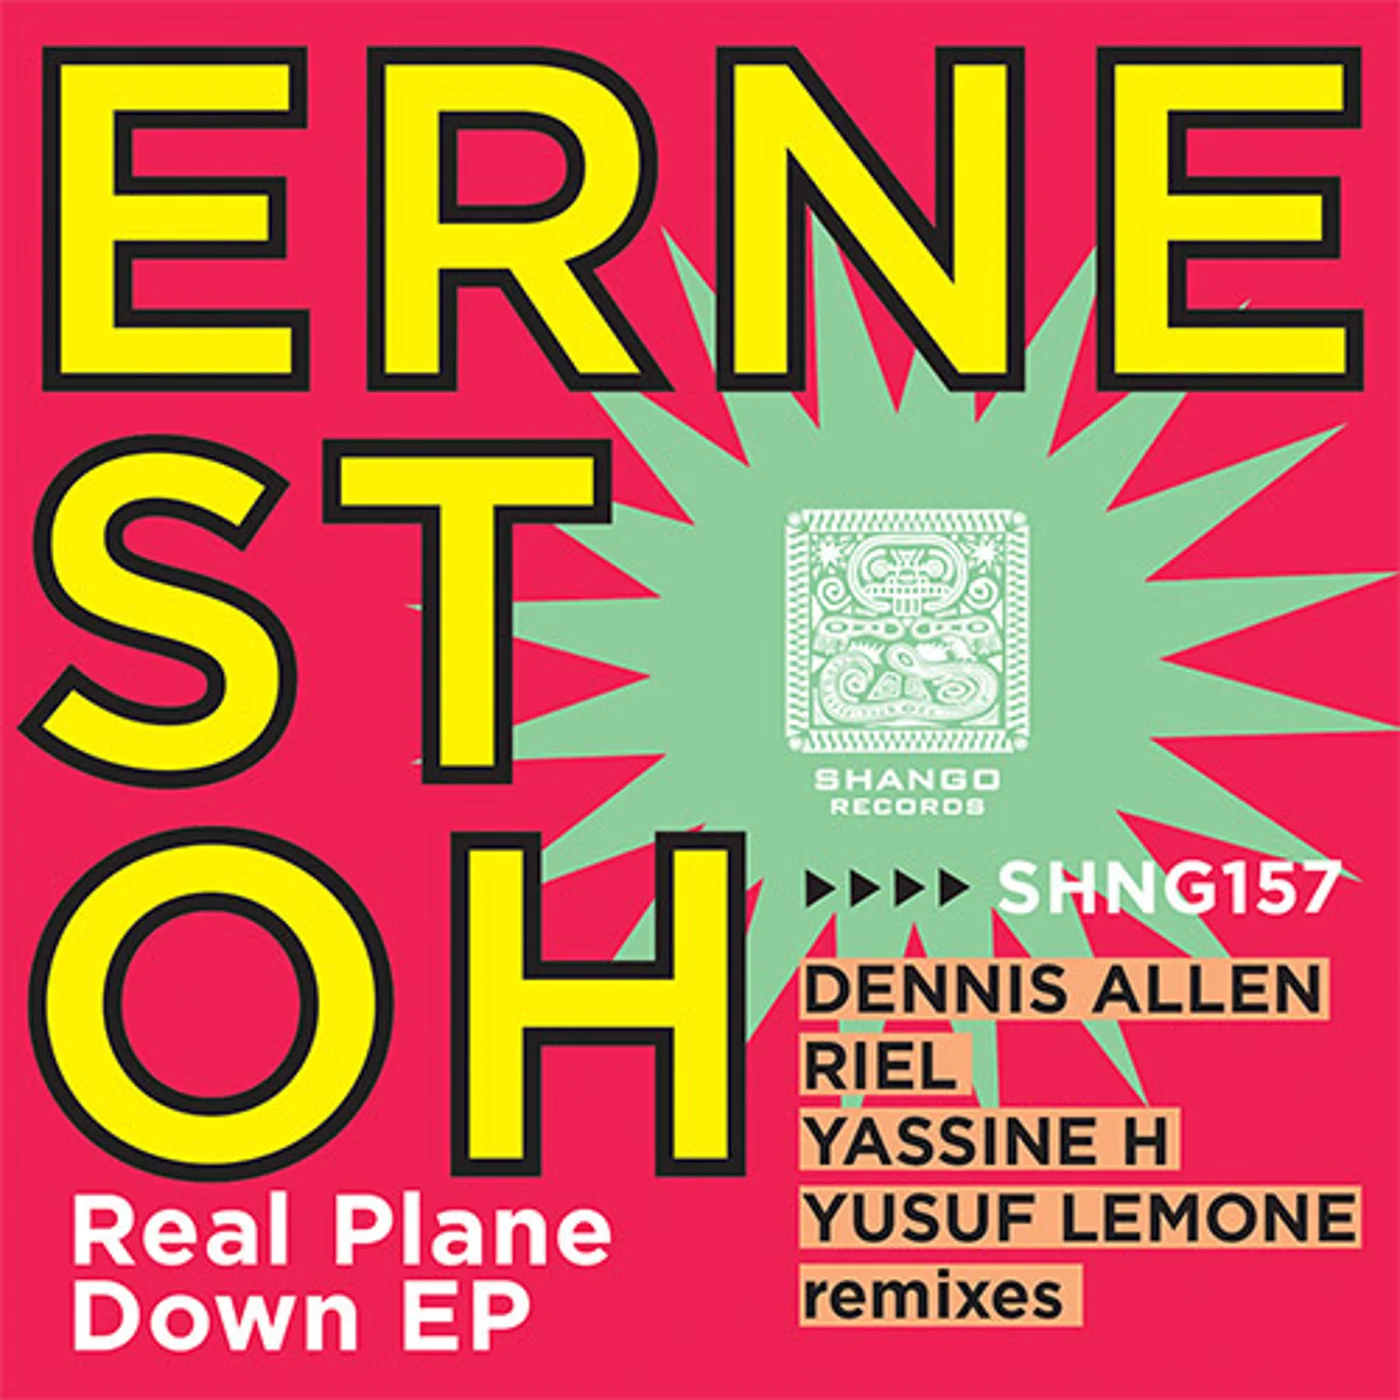 Ernest Oh - REAL PLANE DOWN EP [SHNG157]